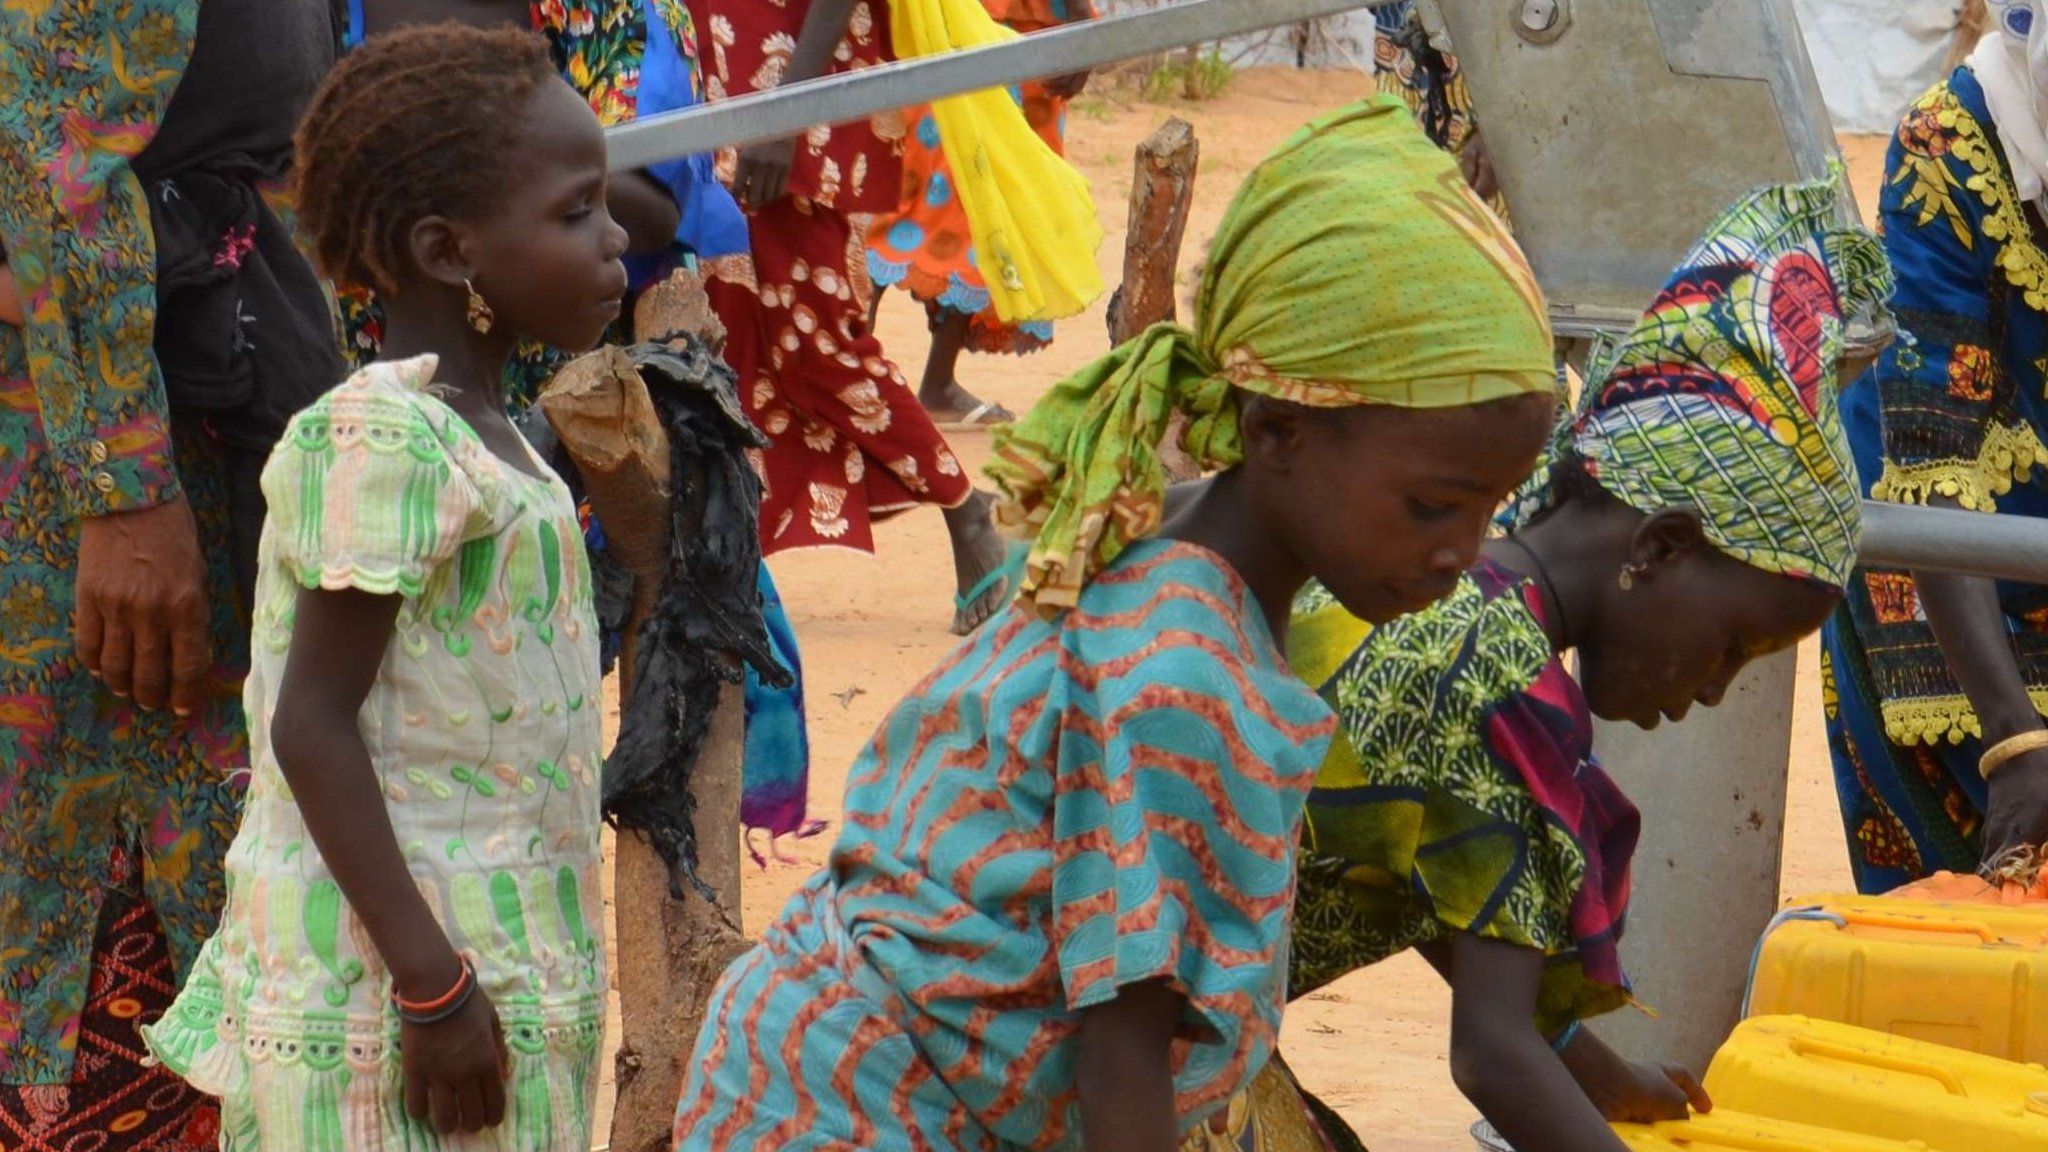 Displaced Nigerians who have fled Boko Haram fill water containers at a camp in Niger